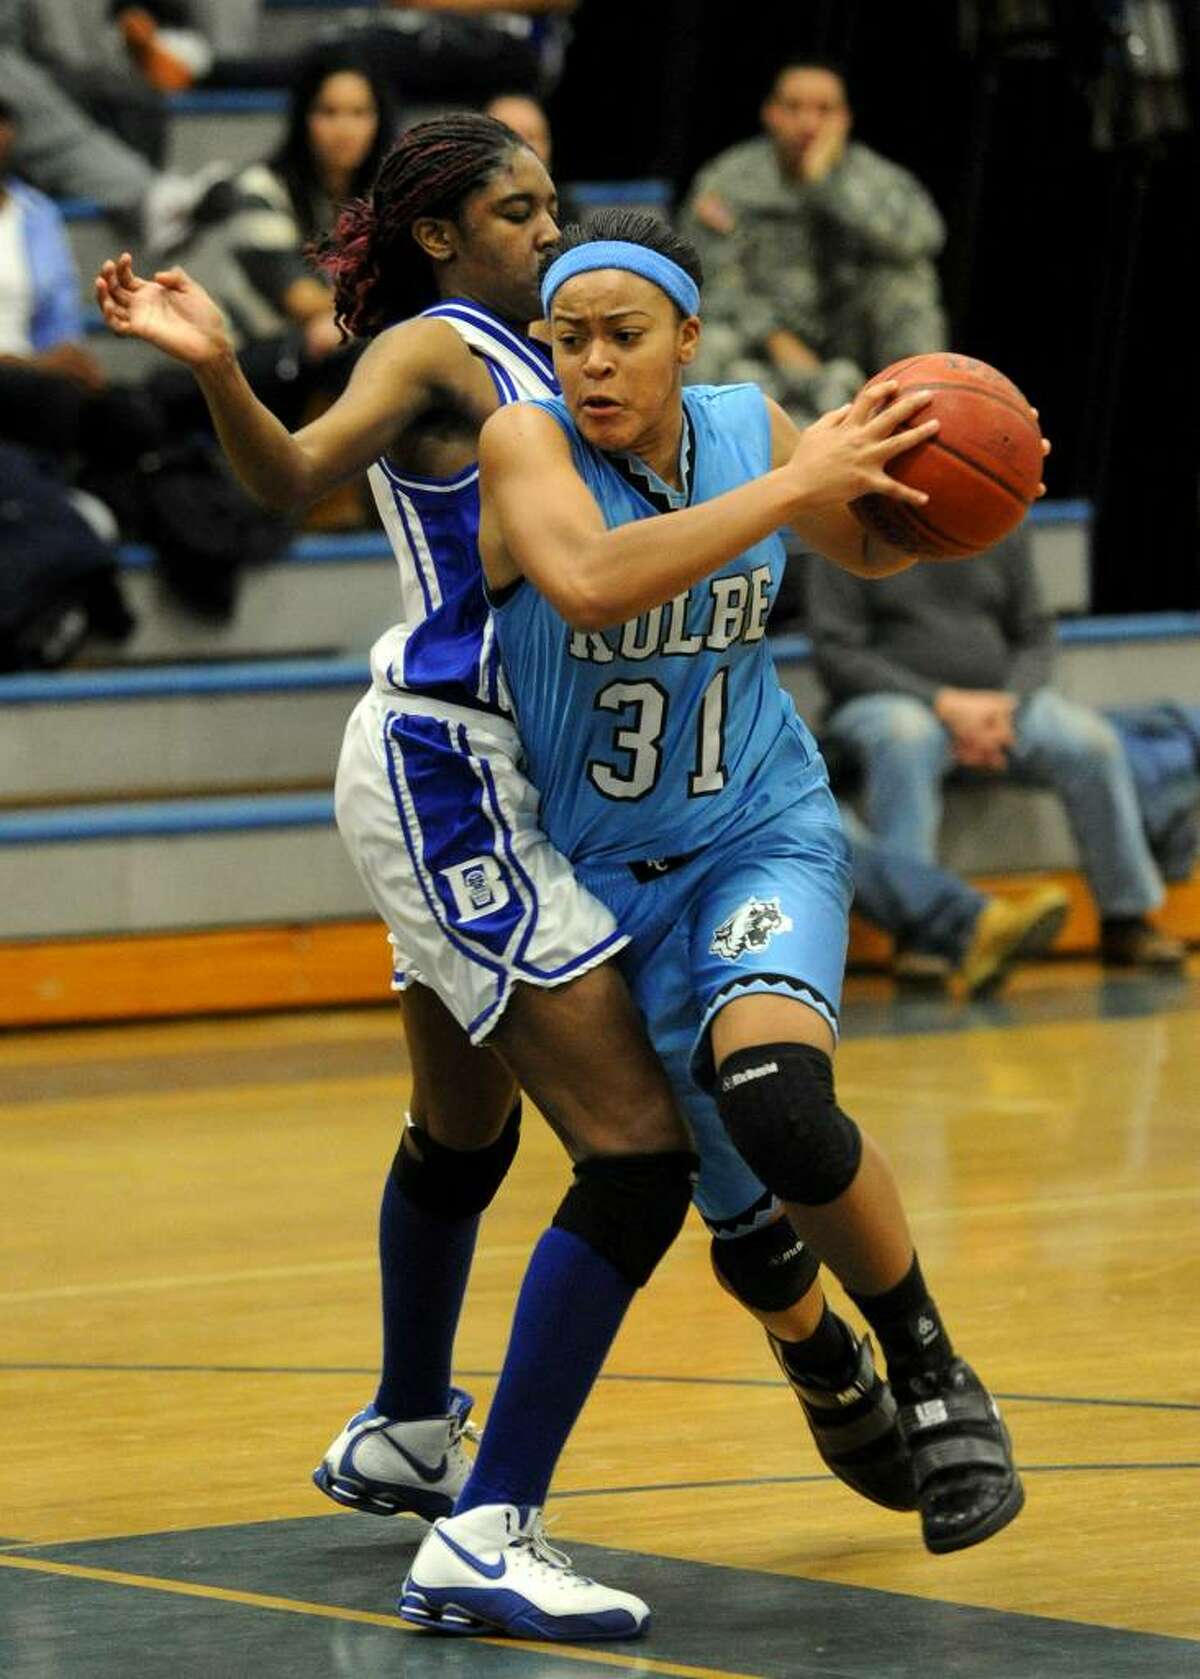 Kolbe's #31 Cherelle Moore tries to drive past Bunnell's #21 Shaqura Palmer, during girls basketball action in Stratford, Conn. on Tuesday Jan. 12, 2010.